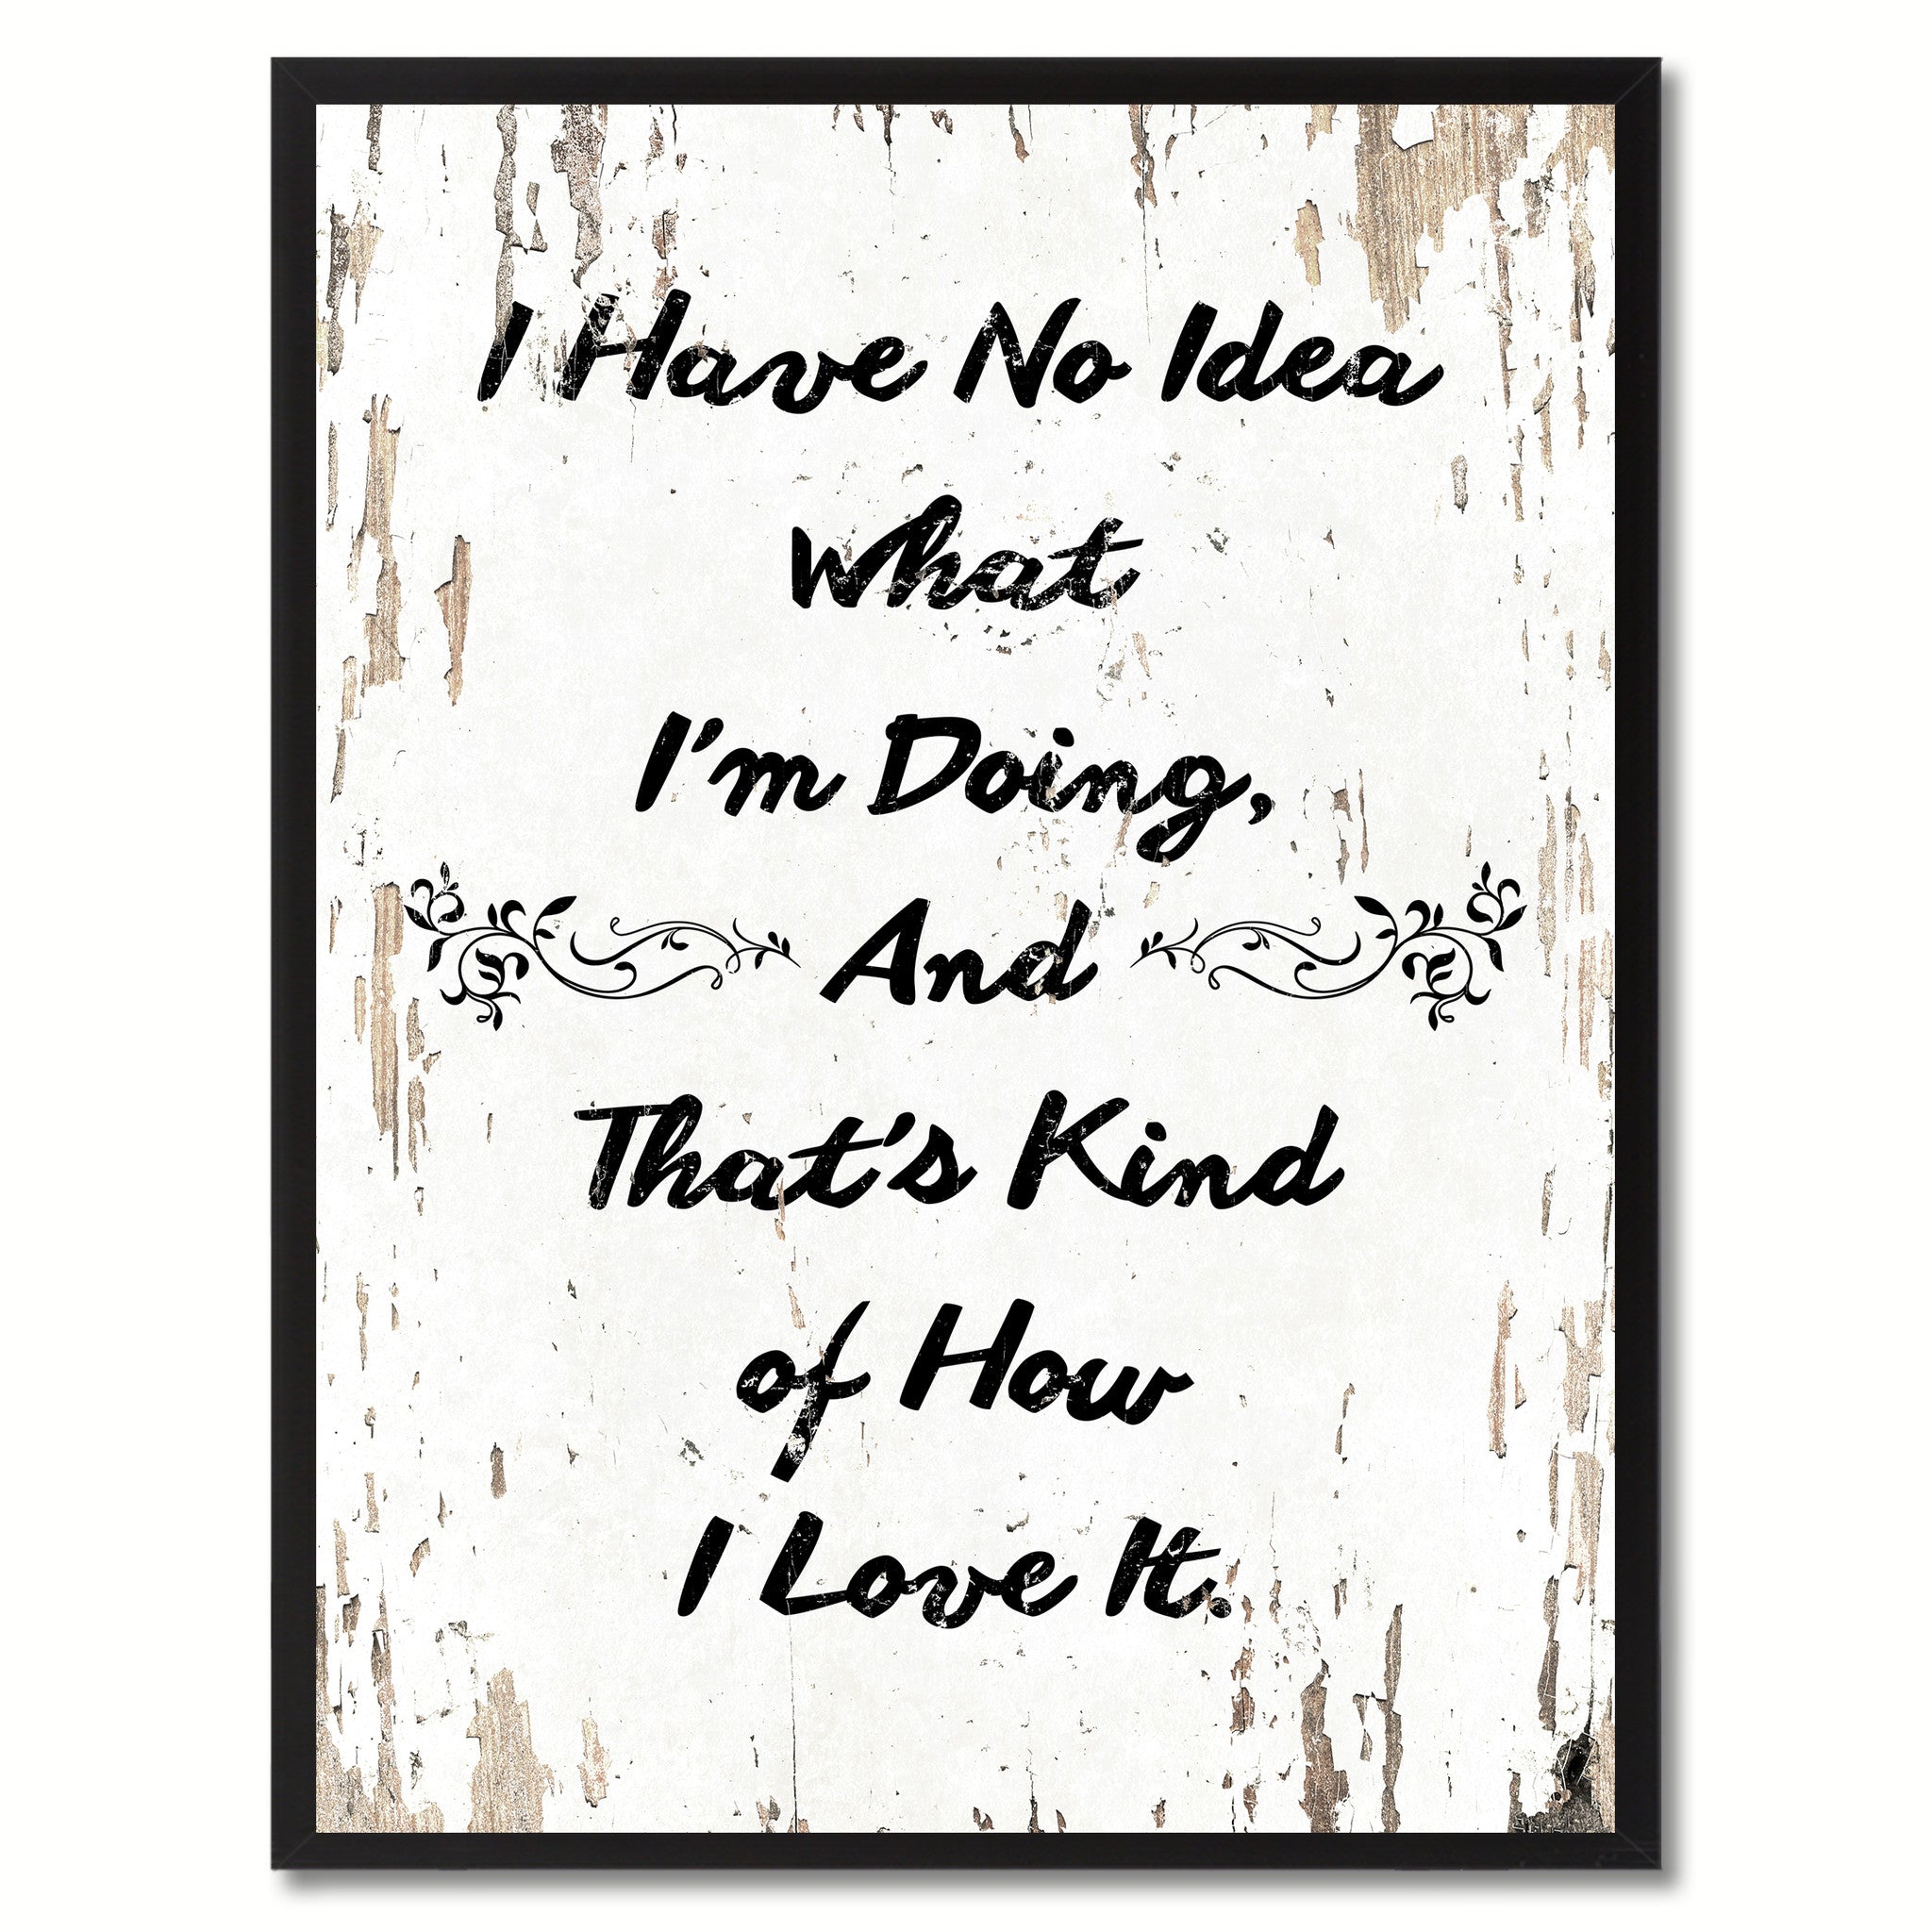 I have no idea what I'm doing & that's kind of how I love it Happy Quote Saying Gift Ideas Home Decor Wall Art